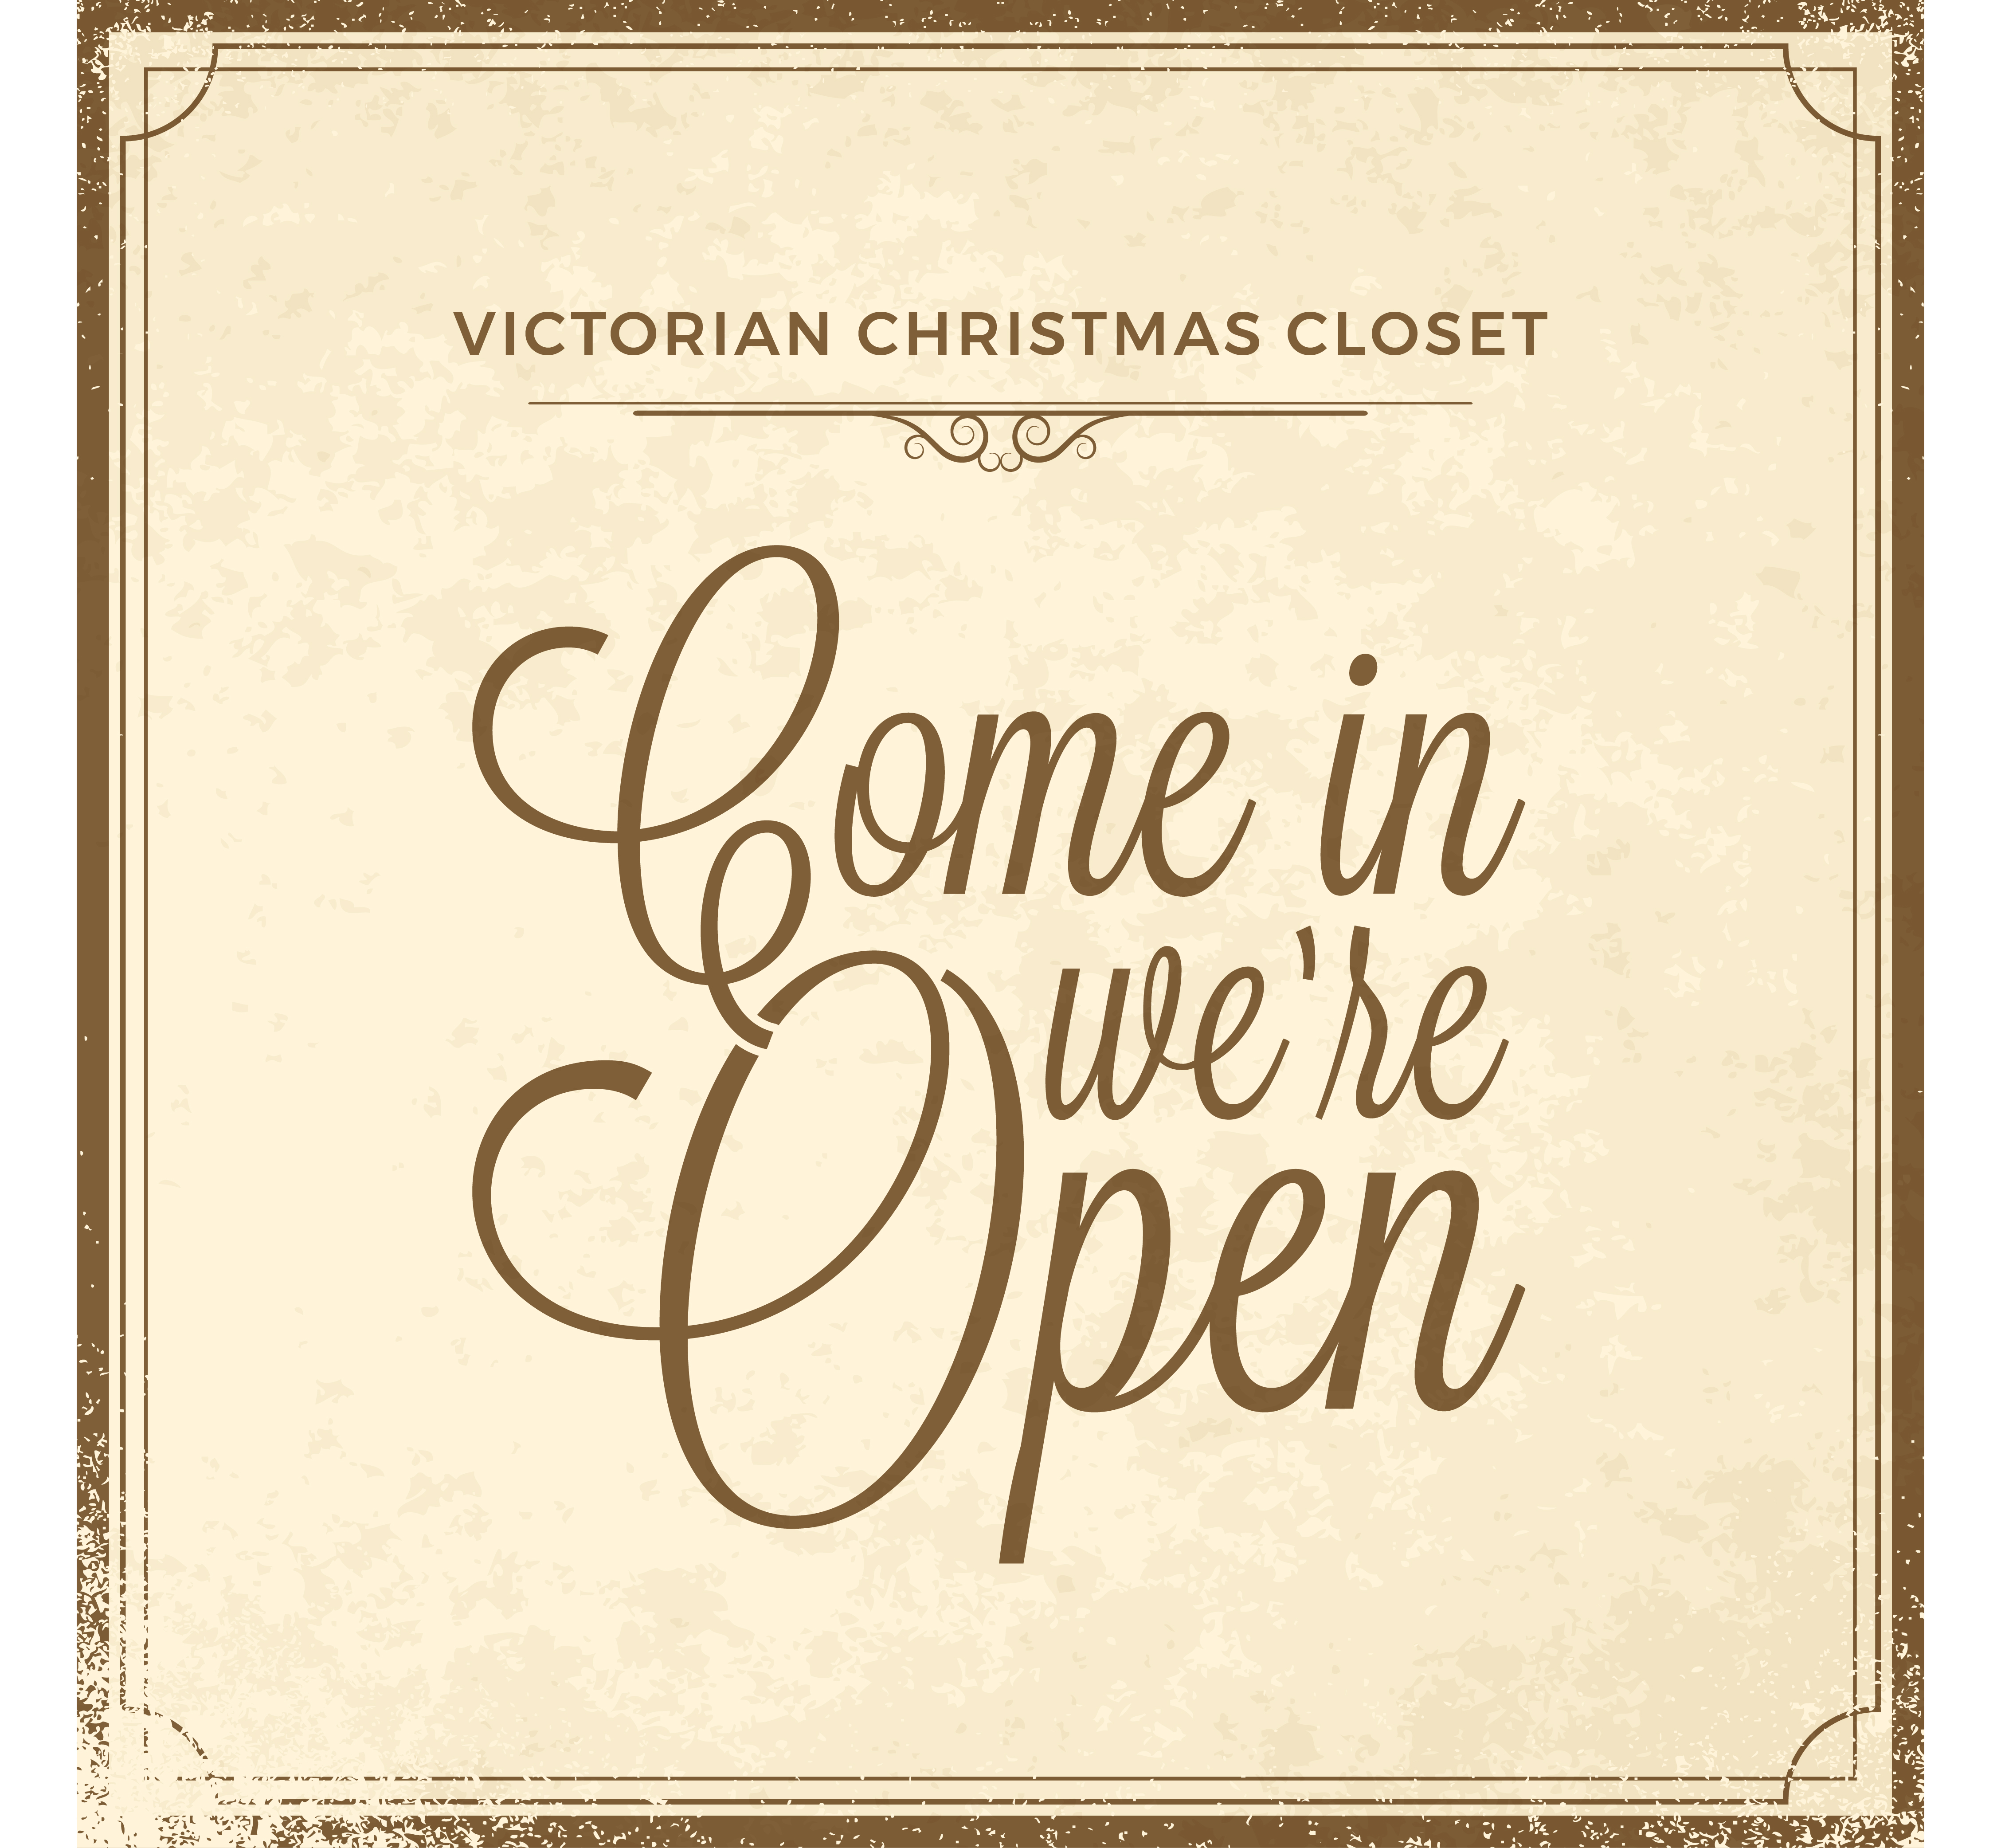 Photo for VICTORIAN CHRISTMAS CLOSET OPEN TO THE PUBLIC